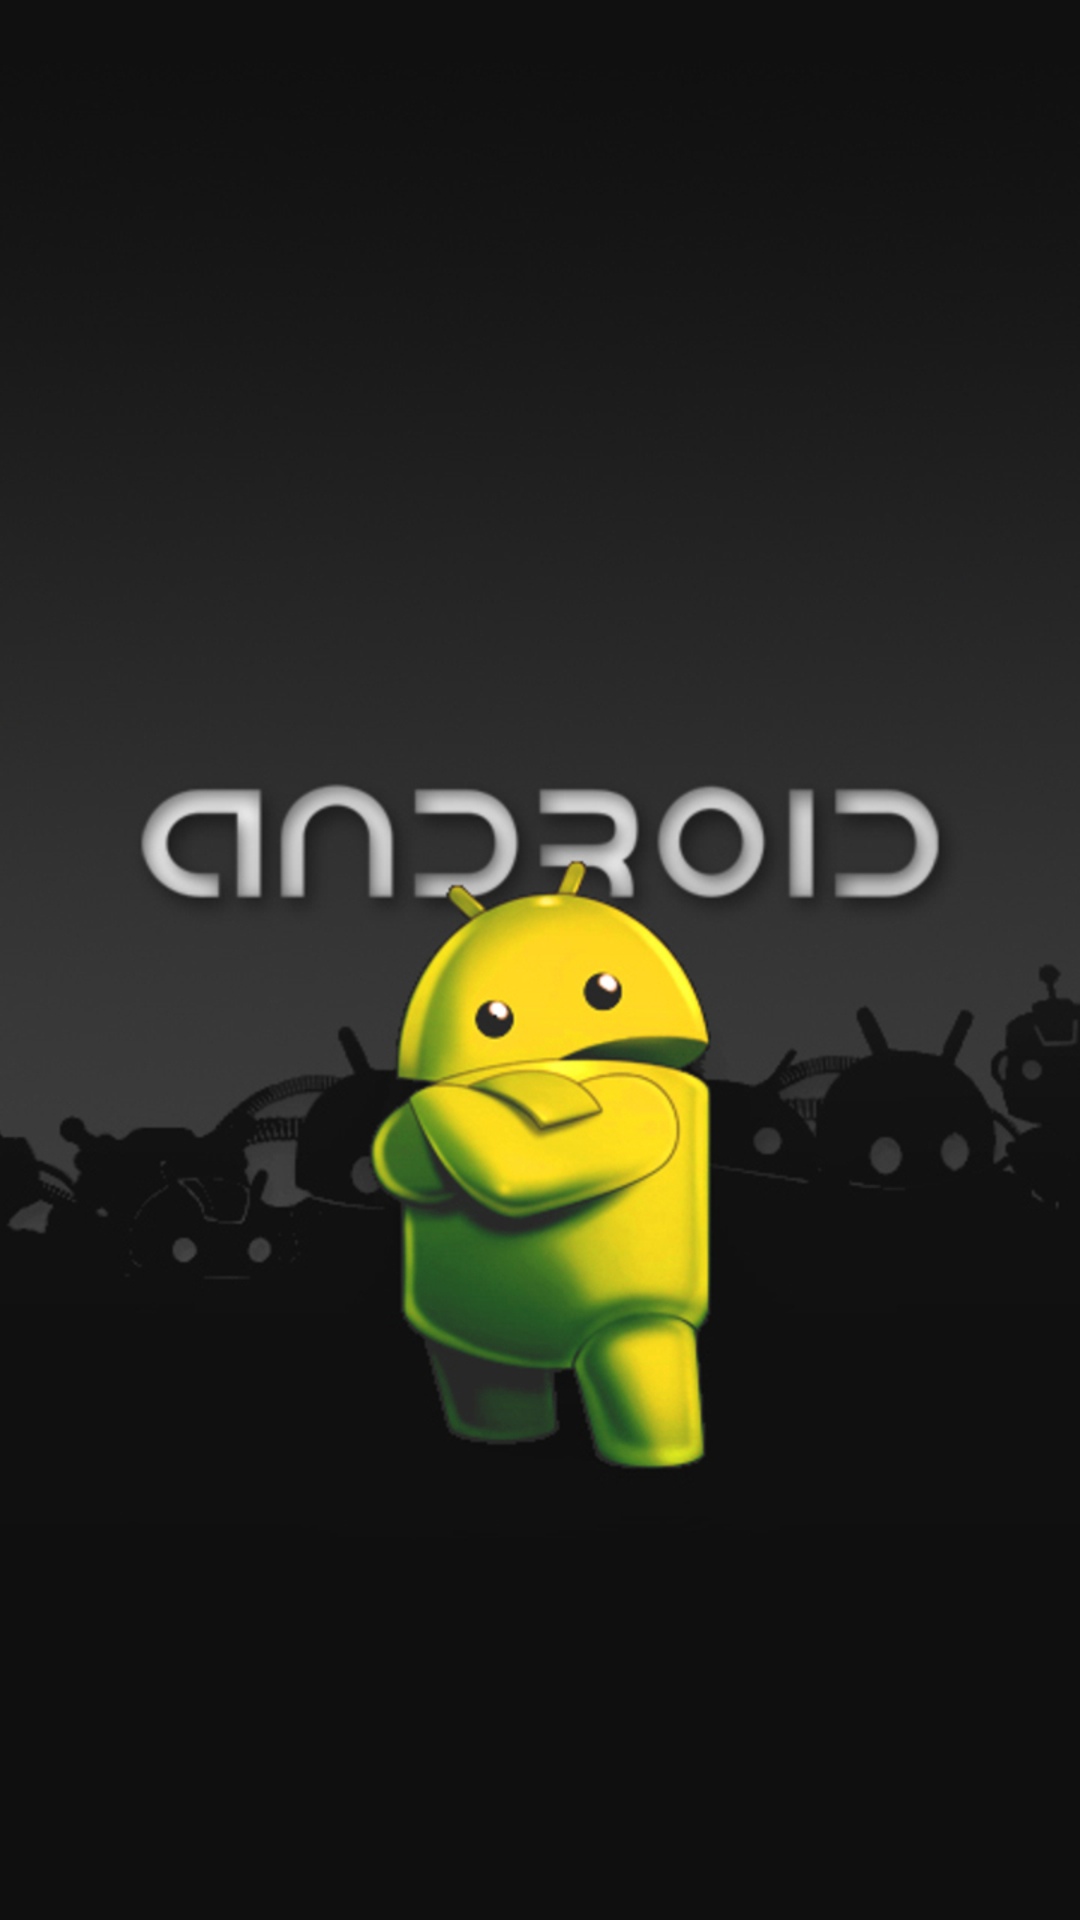 Android Central Logo Wallpaper